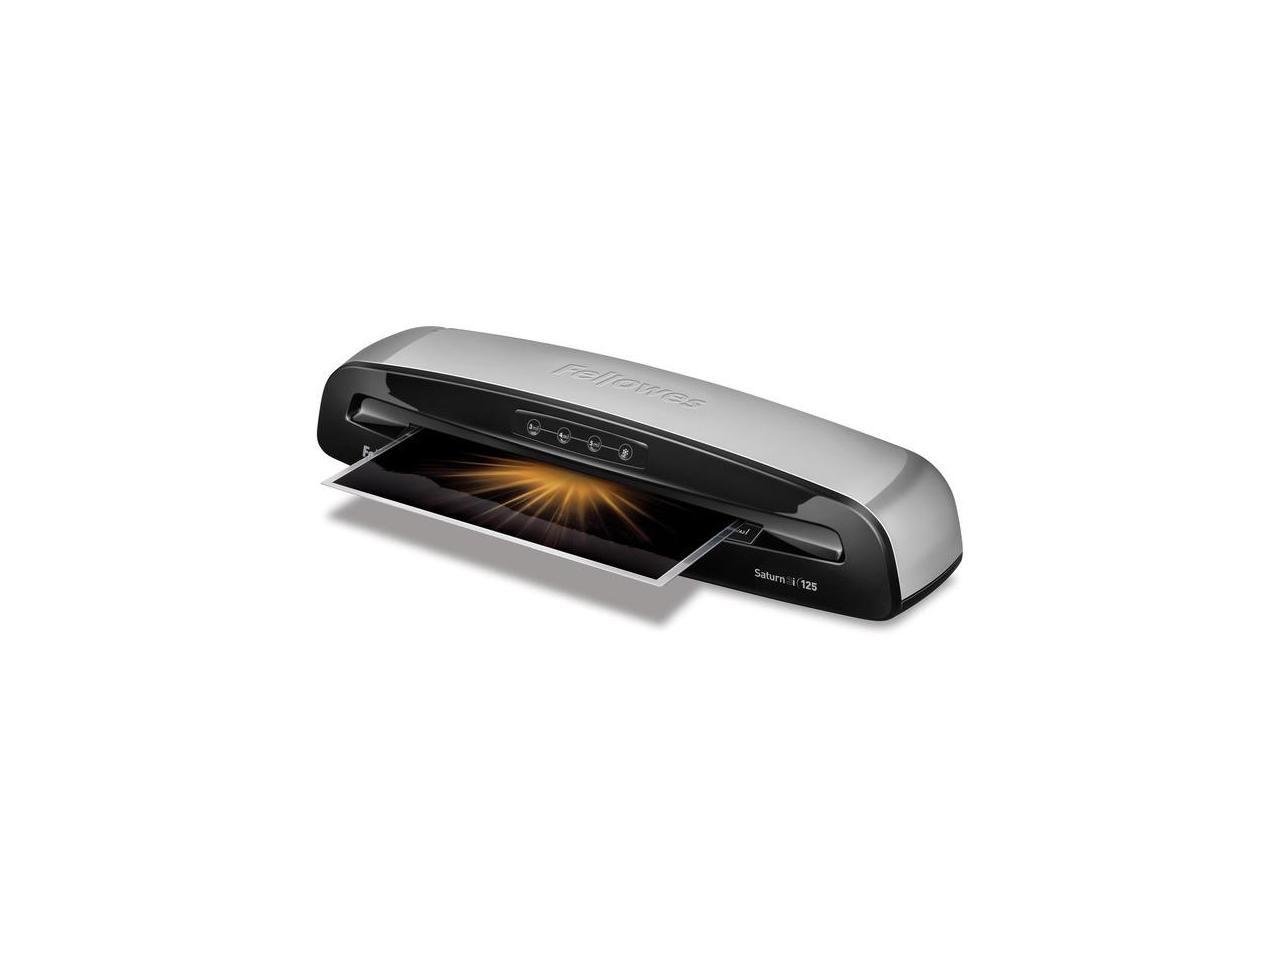 Details about   Fellowes 5736606 Laminator Saturn3i 125 Rapid 1 Minute Warm-up with 12.5 inch 